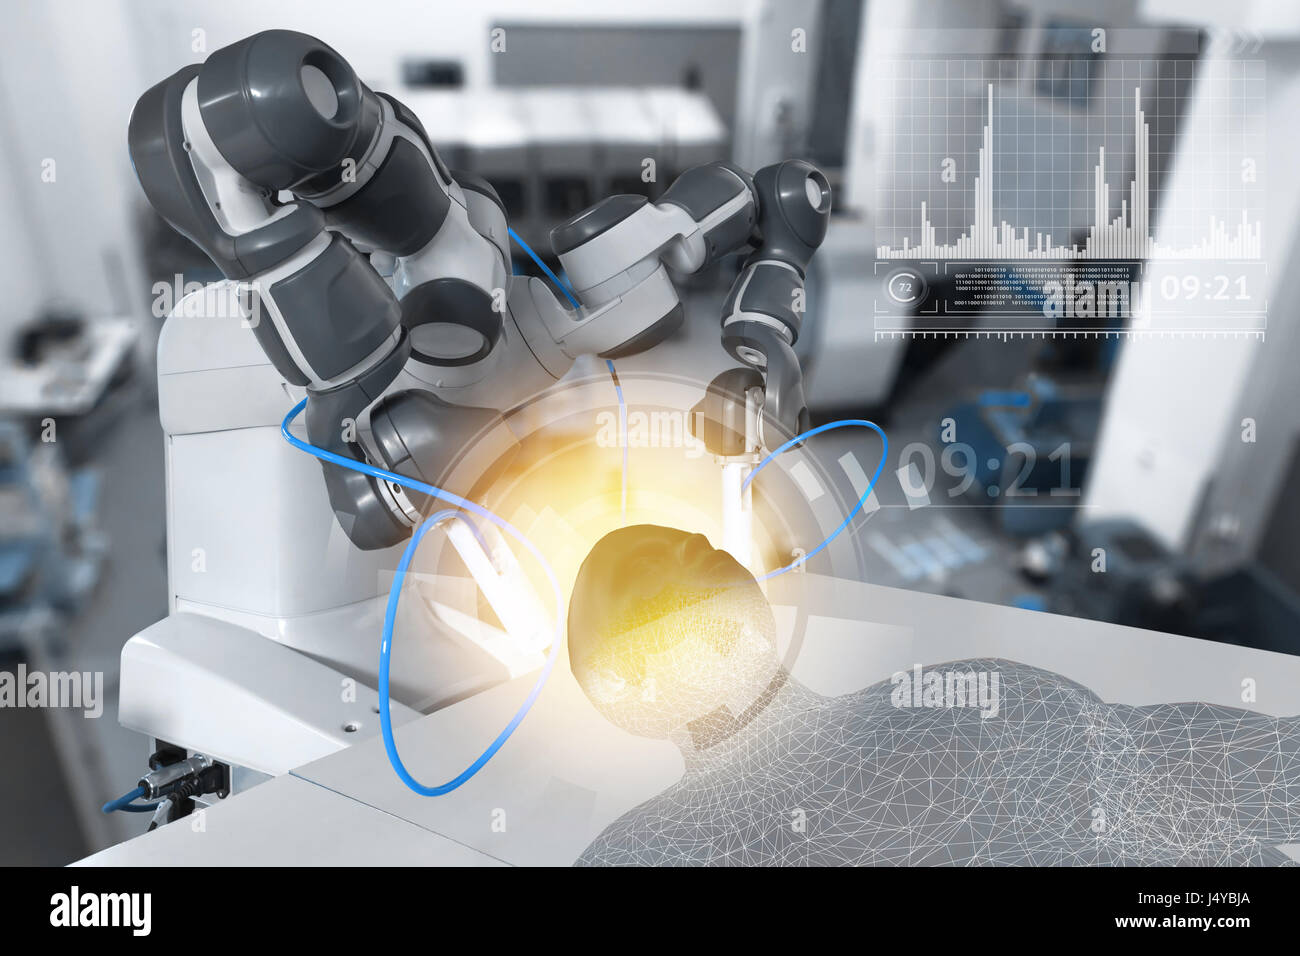 Industry 4.0 , industrial internet of things concept. Heavy automate wireless Robot arm build robot human and graphic in hitech future smart factory b Stock Photo